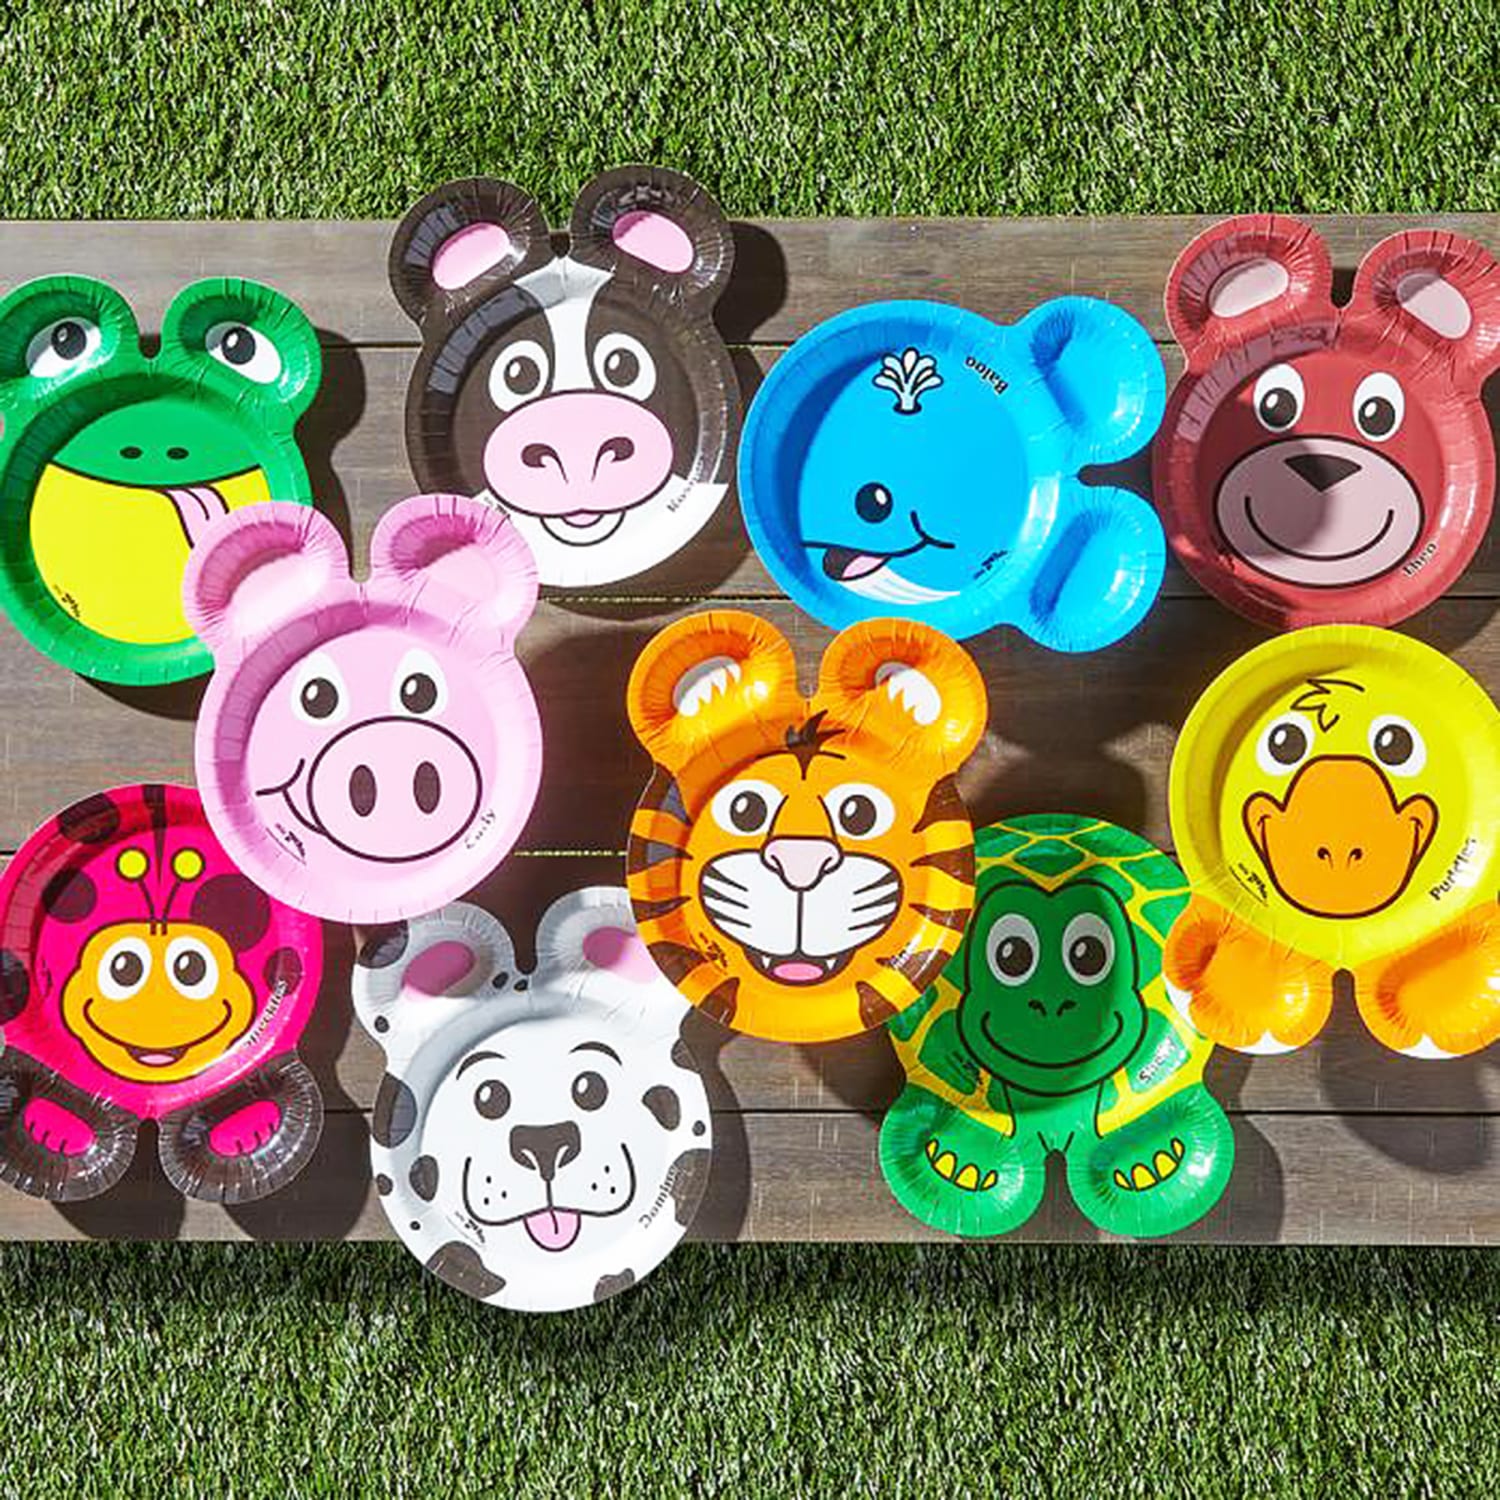 Hefty® Zoo Pals® Plates are back!